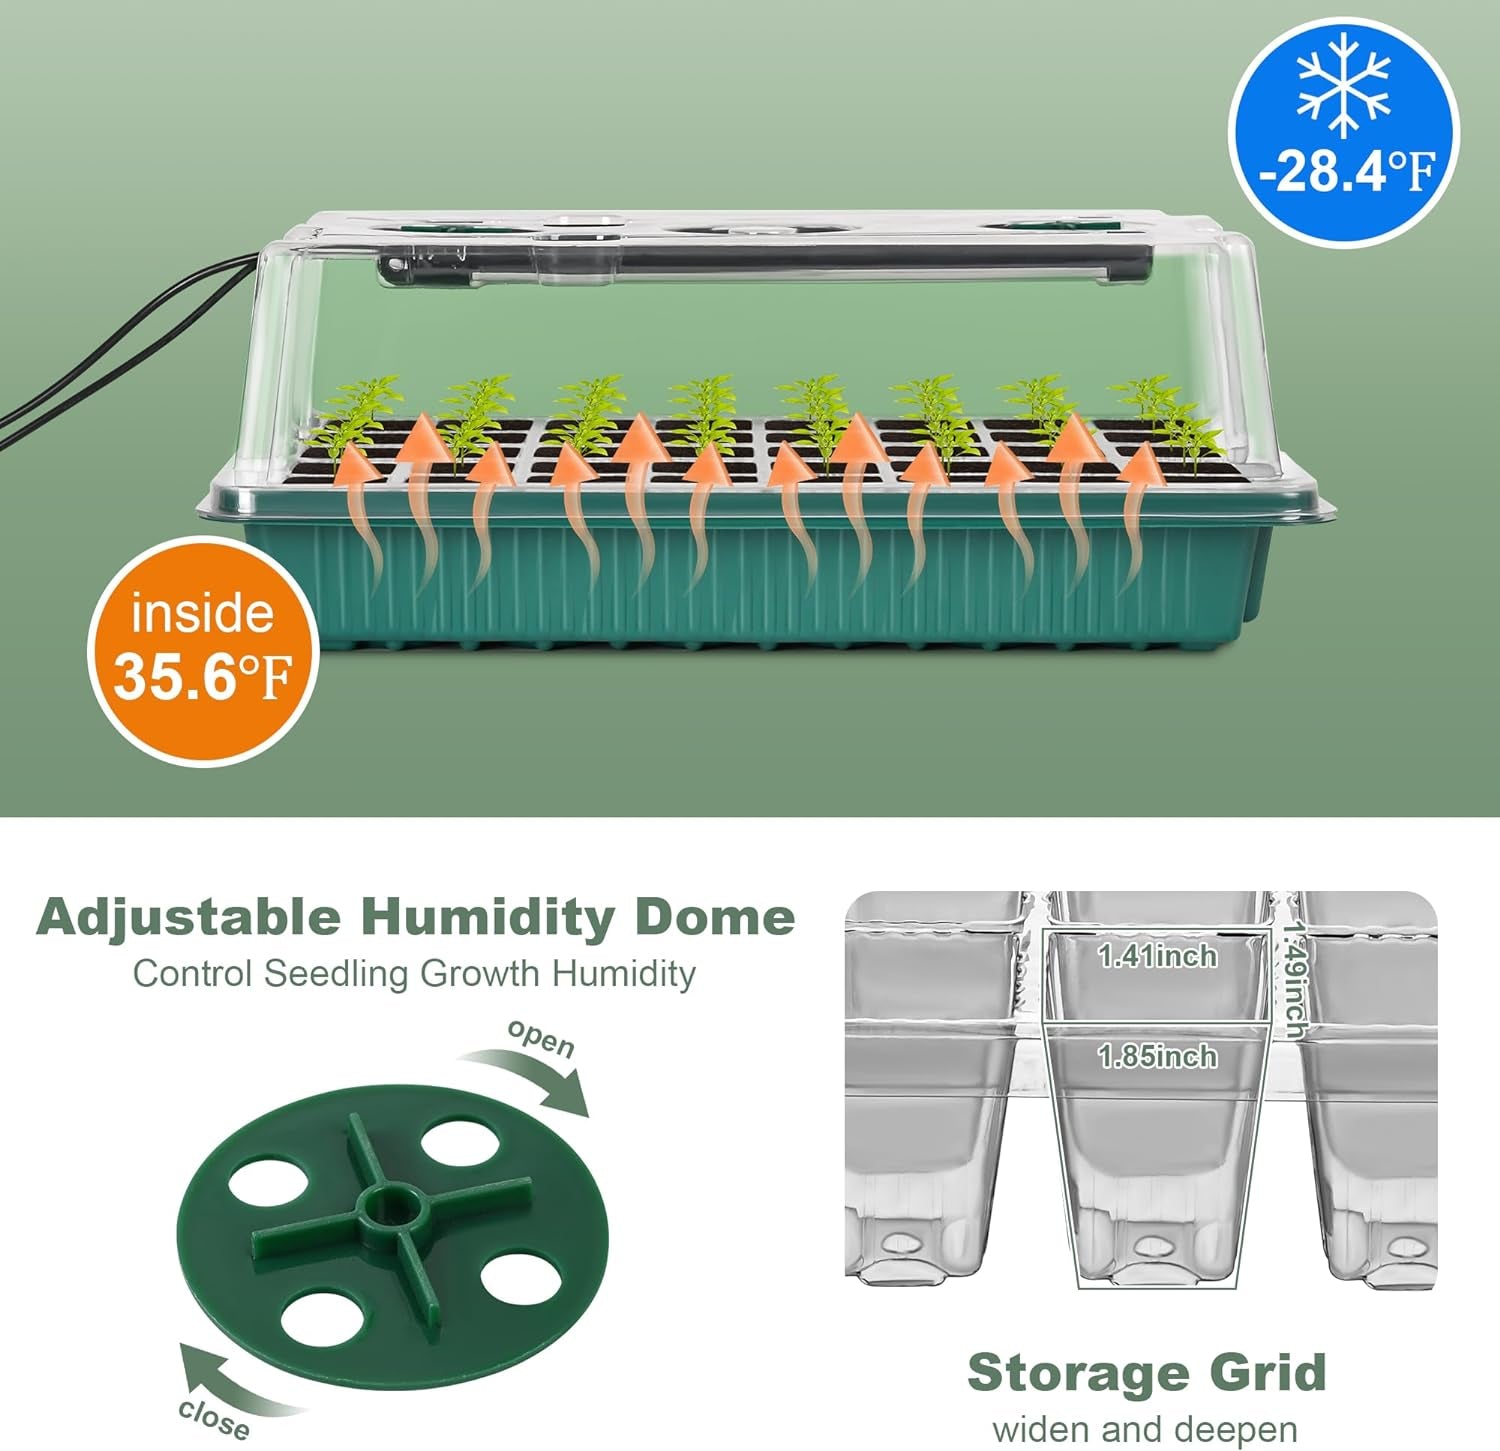 2 Packs Starter Tray with Grow Light, 80 Cells Seed Starter Kits with Humidity Dome and Base Plant Germination Seedling Starter Kit with Smart Timer for Indoor Greenhouse Wheatgrass Hydroponic